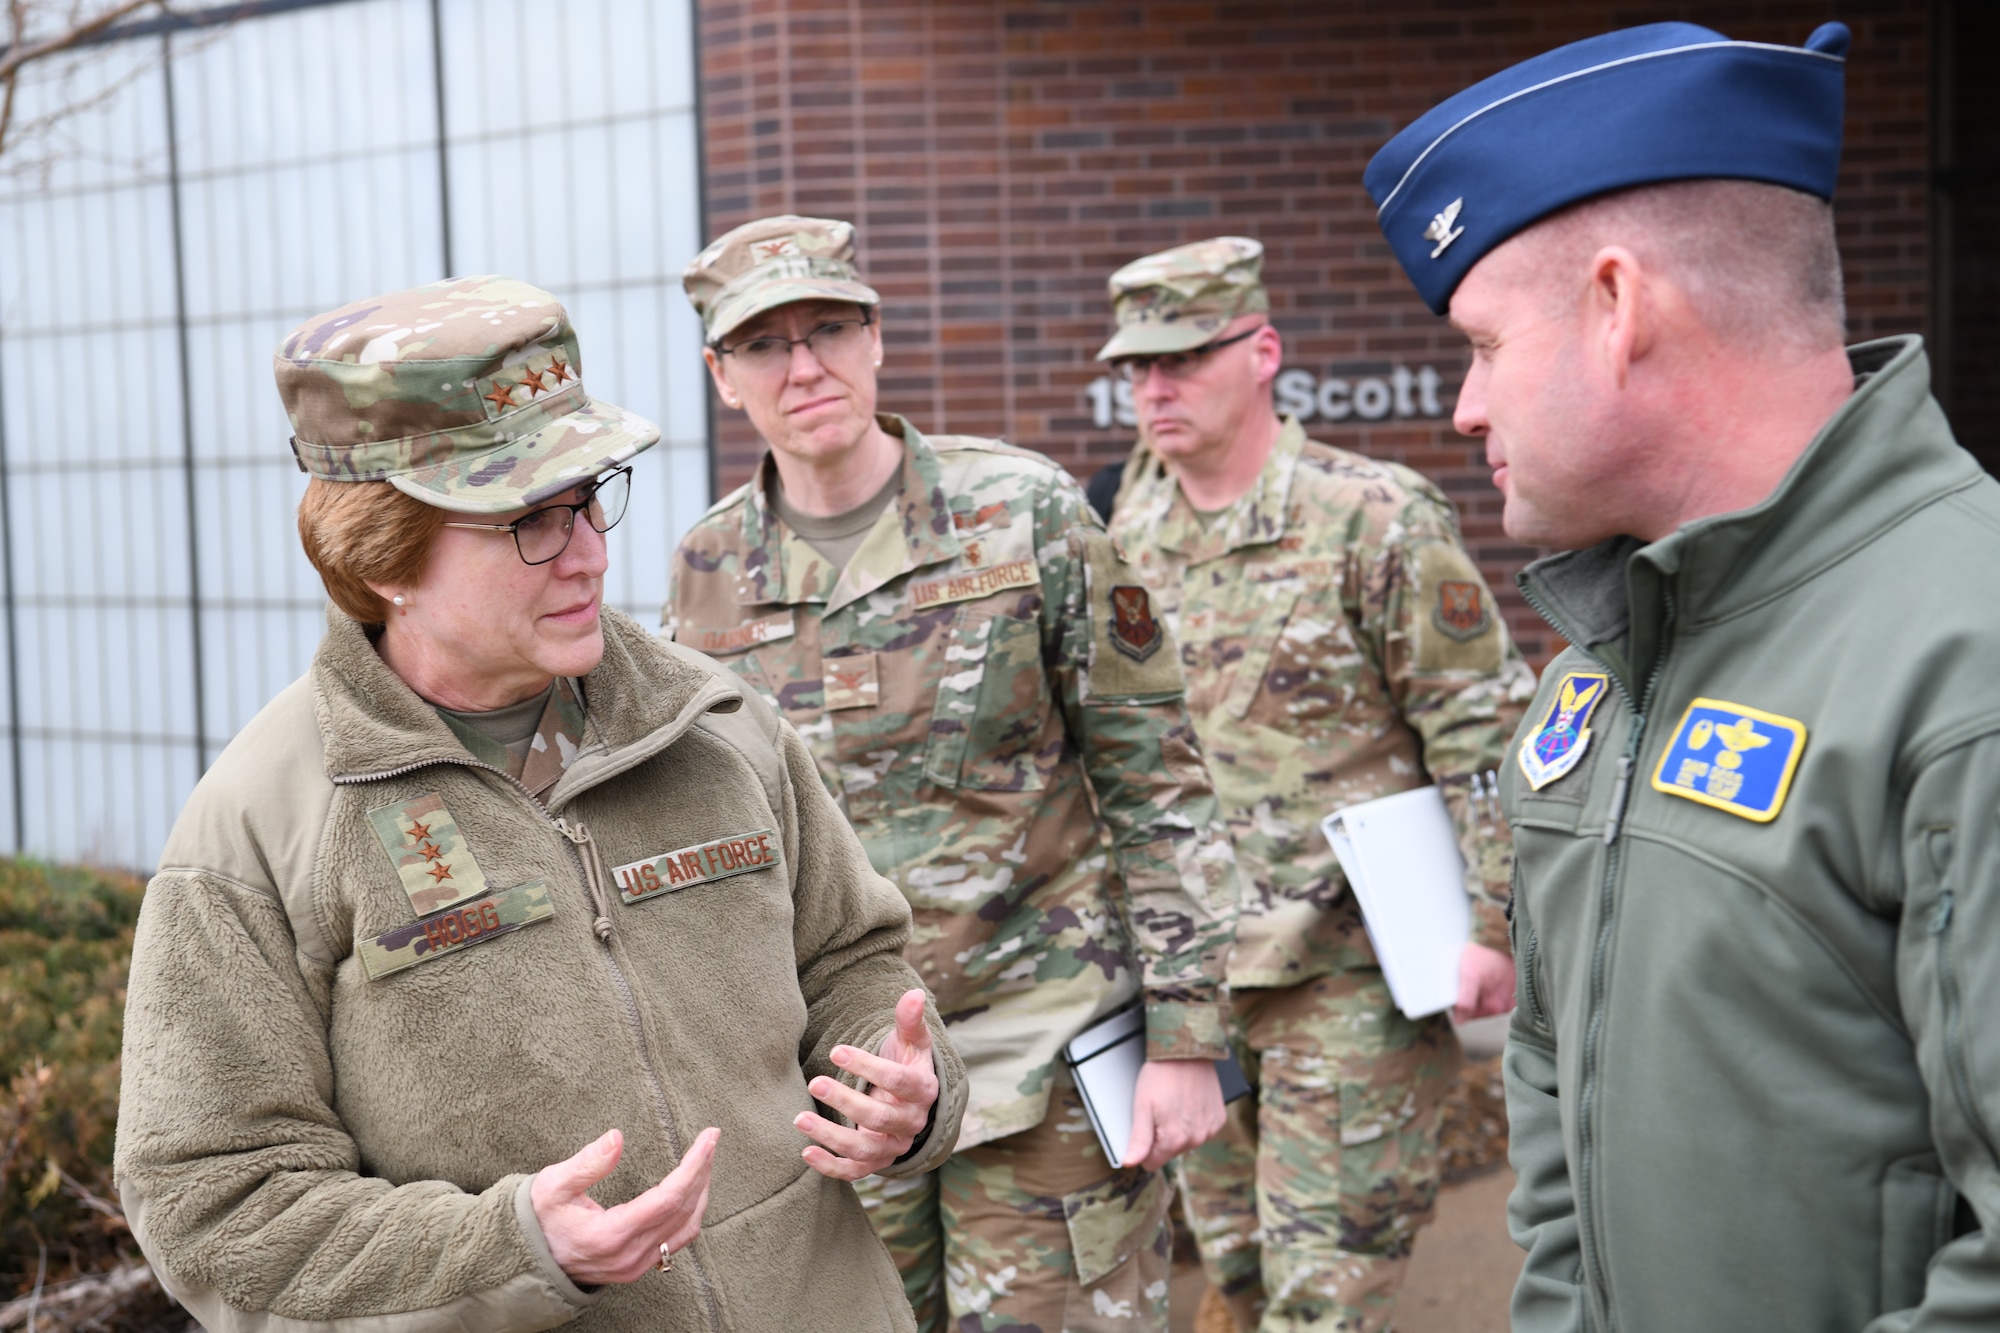 Lt. Gen. Dorothy Hogg, Air Force Surgeon General, speaks with Col. David Doss, 28th Bomb Wing commander, at Ellsworth Air Force Base, South Dakota, Jan. 30, 2020. During her visit, she visited the base medical facilities, toured a B-1B Lancer and simulator and, most importantly, met with Airmen. (U.S. Air Force photo by Senior Airman Nicolas Z. Erwin)